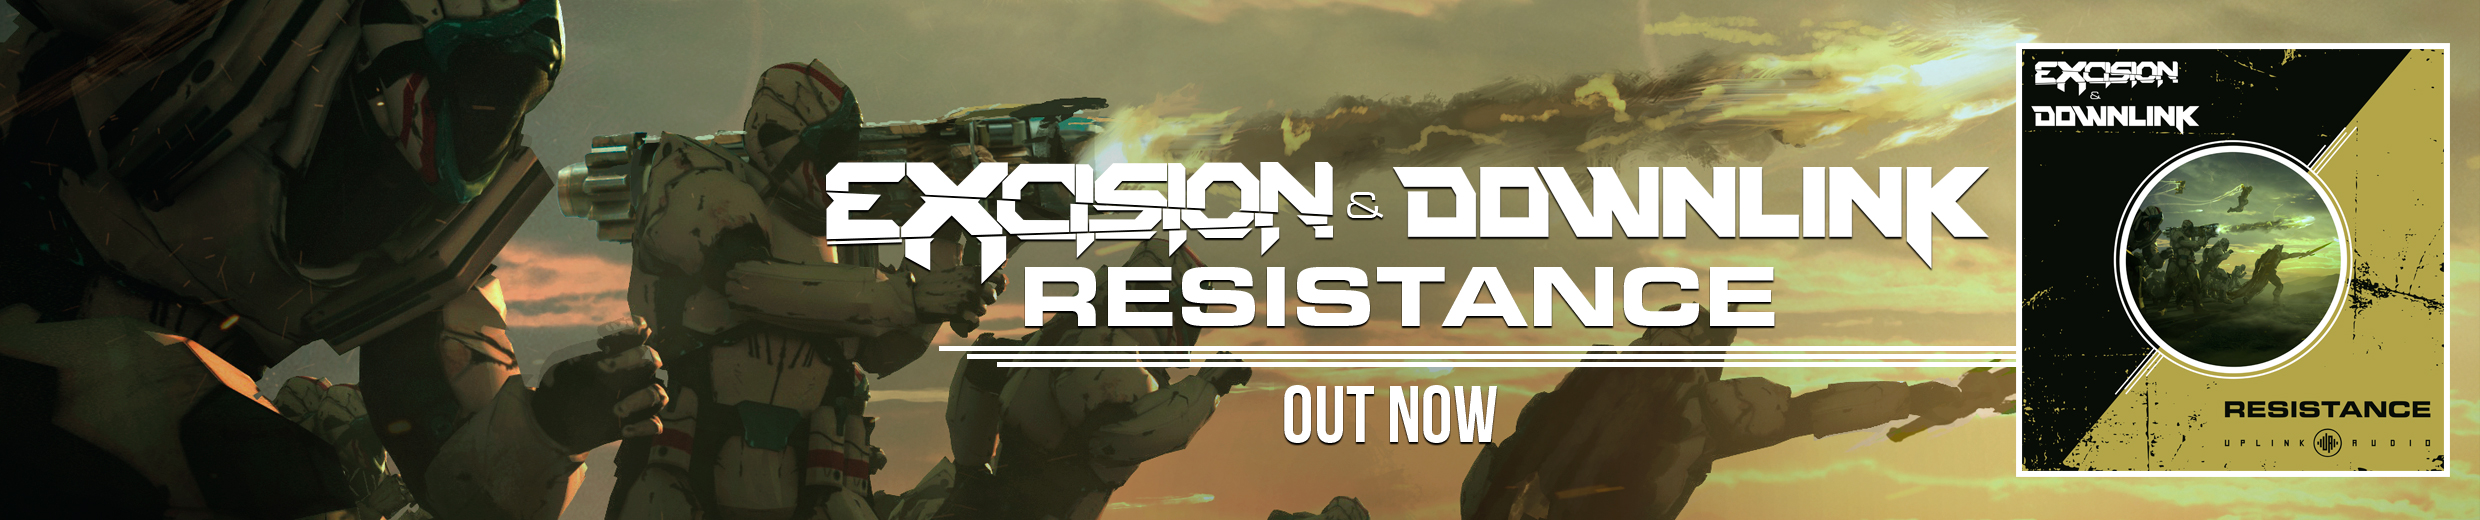 Excision & Downlink – Resistance Out Now!